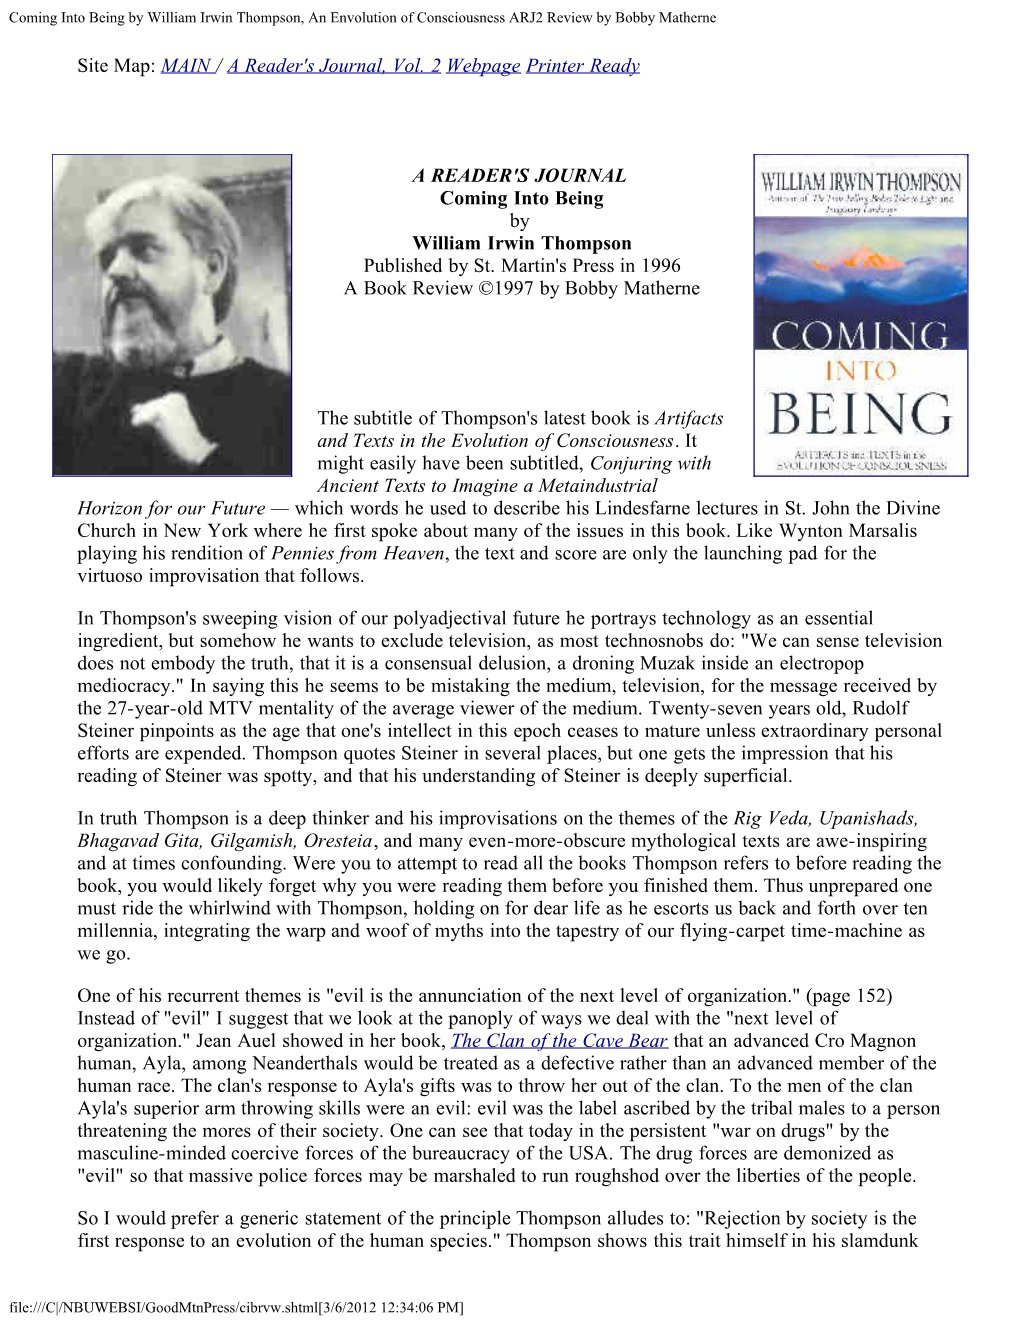 Coming Into Being by William Irwin Thompson, an Envolution of Consciousness ARJ2 Review by Bobby Matherne